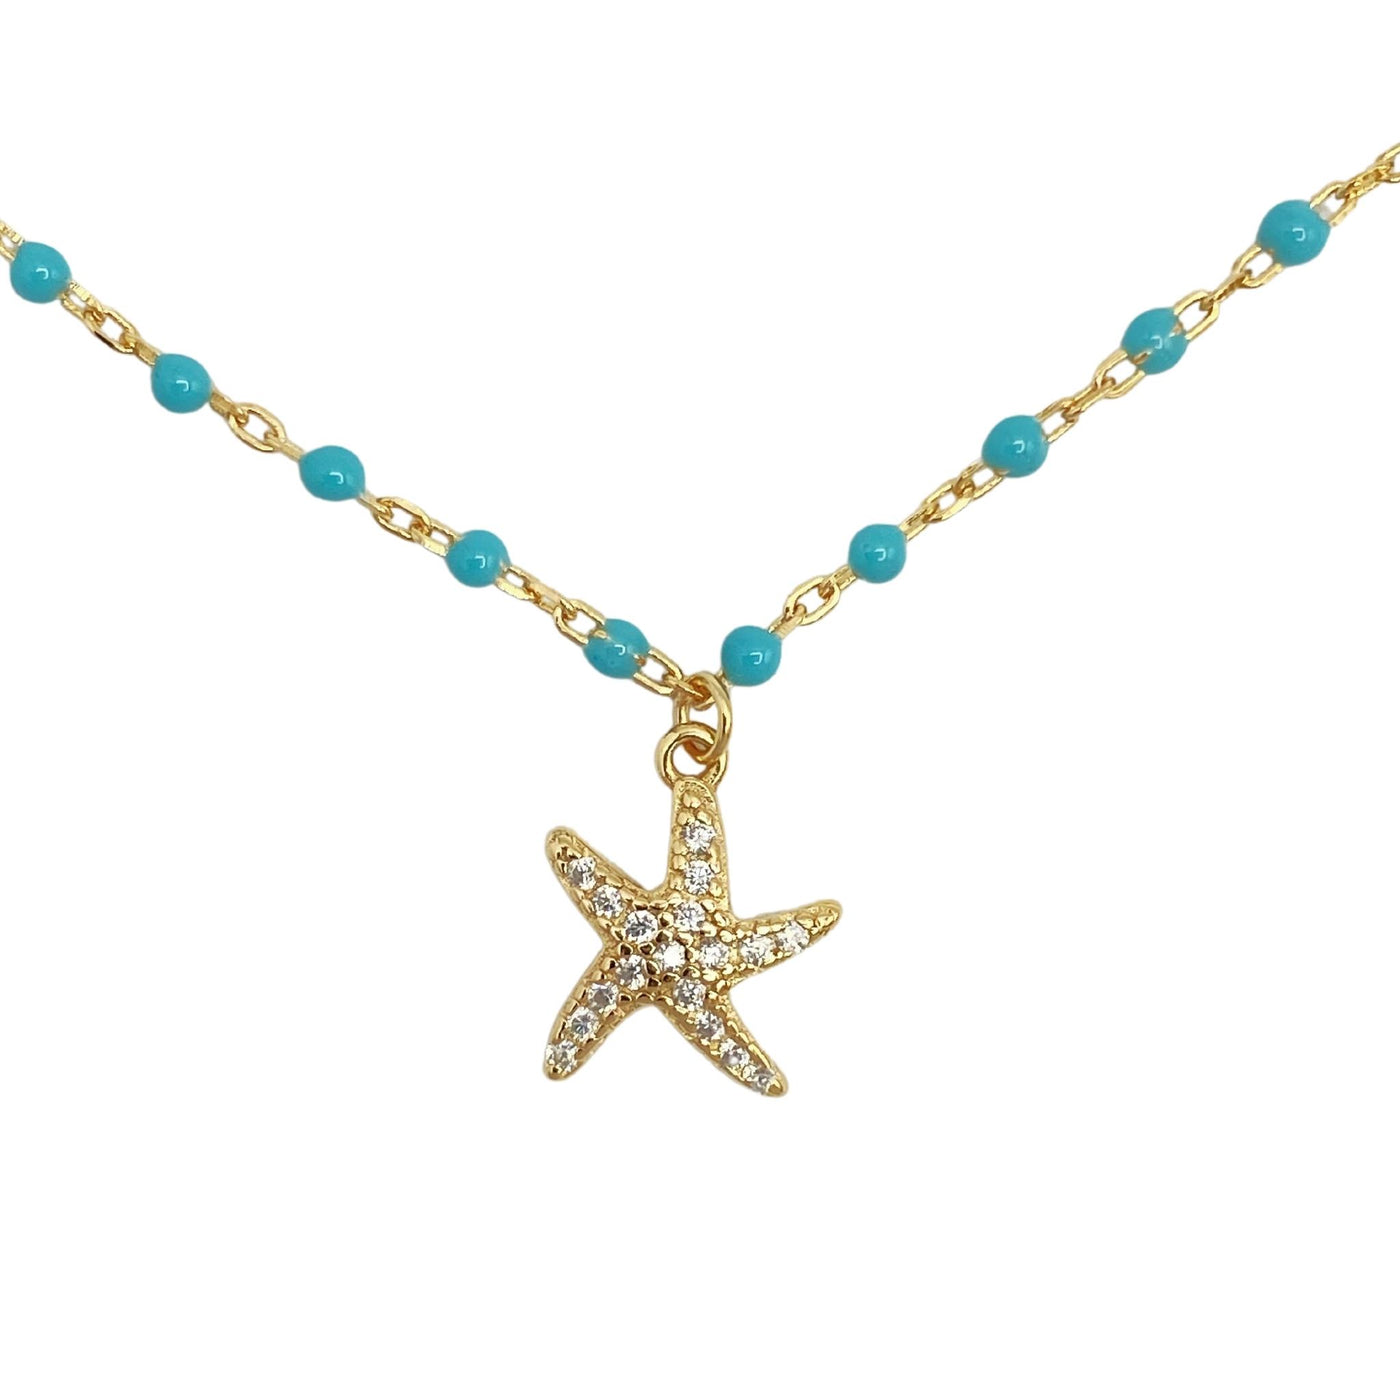 Silver enamel necklace with starfish charm